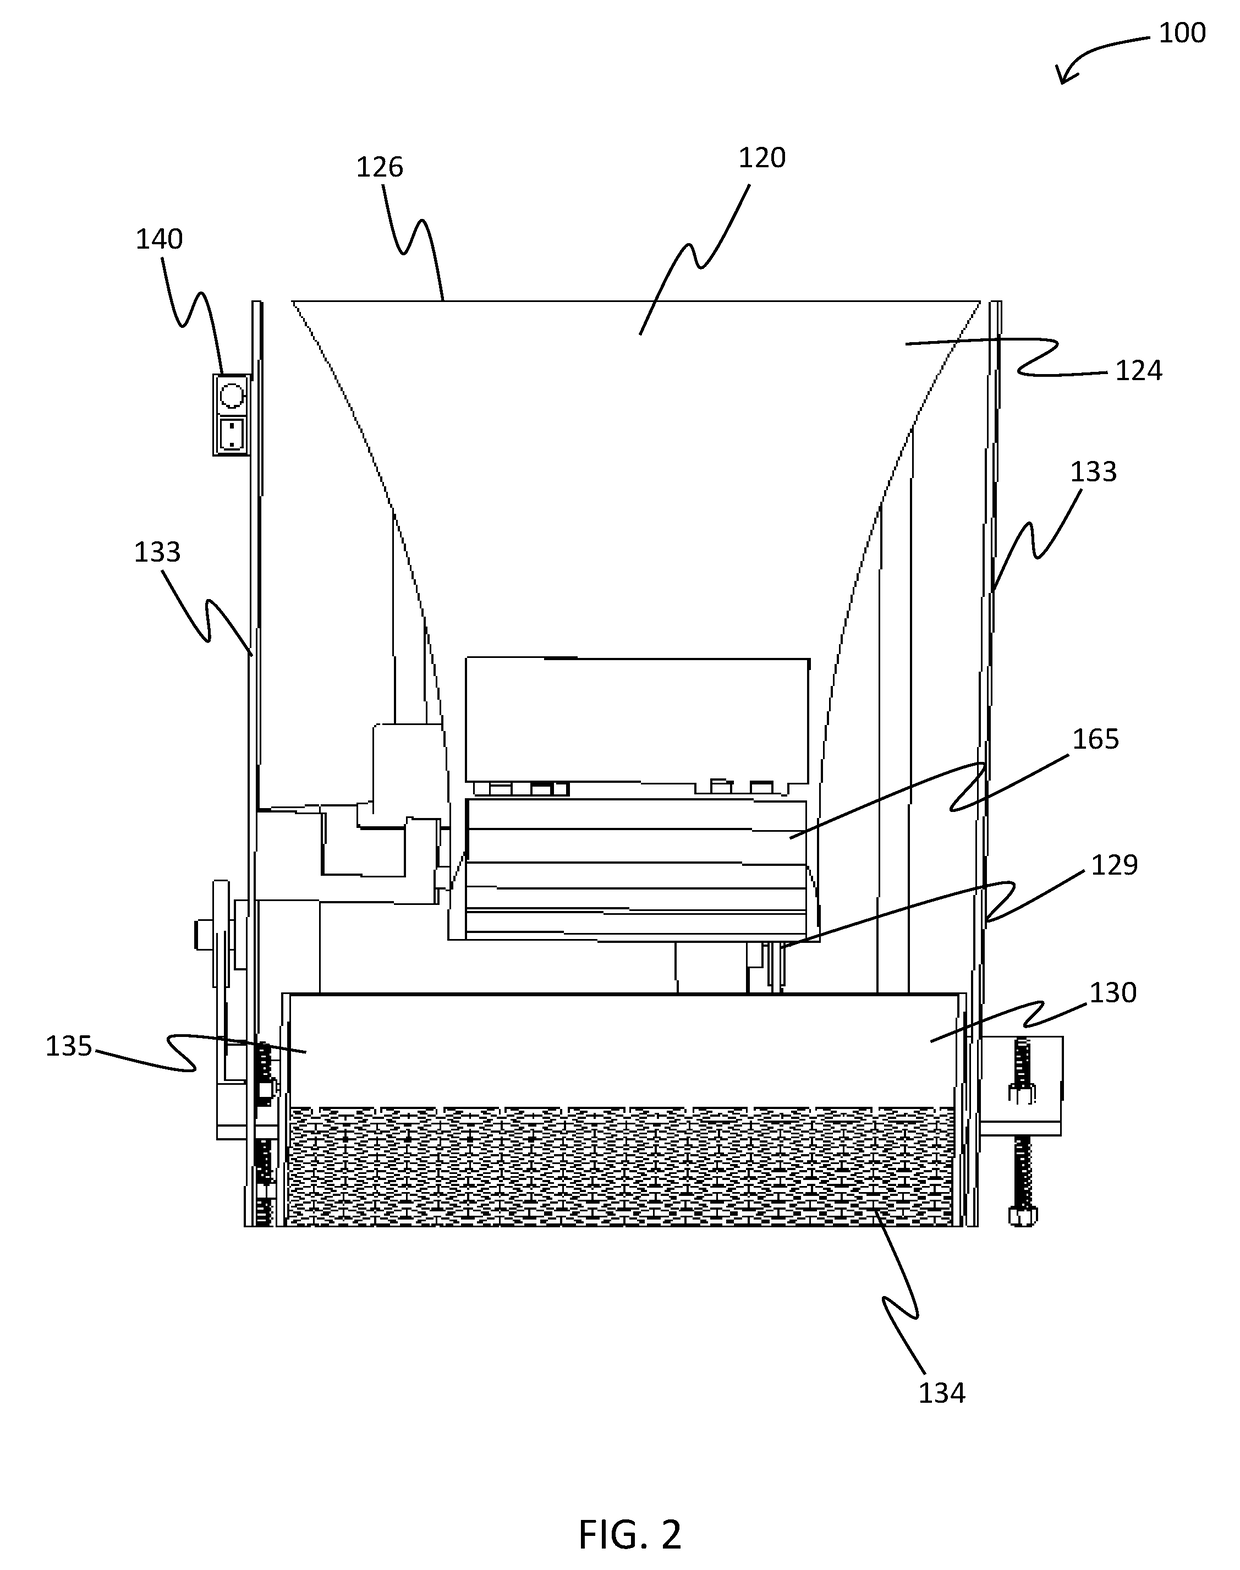 Apparatus for processing cannabis